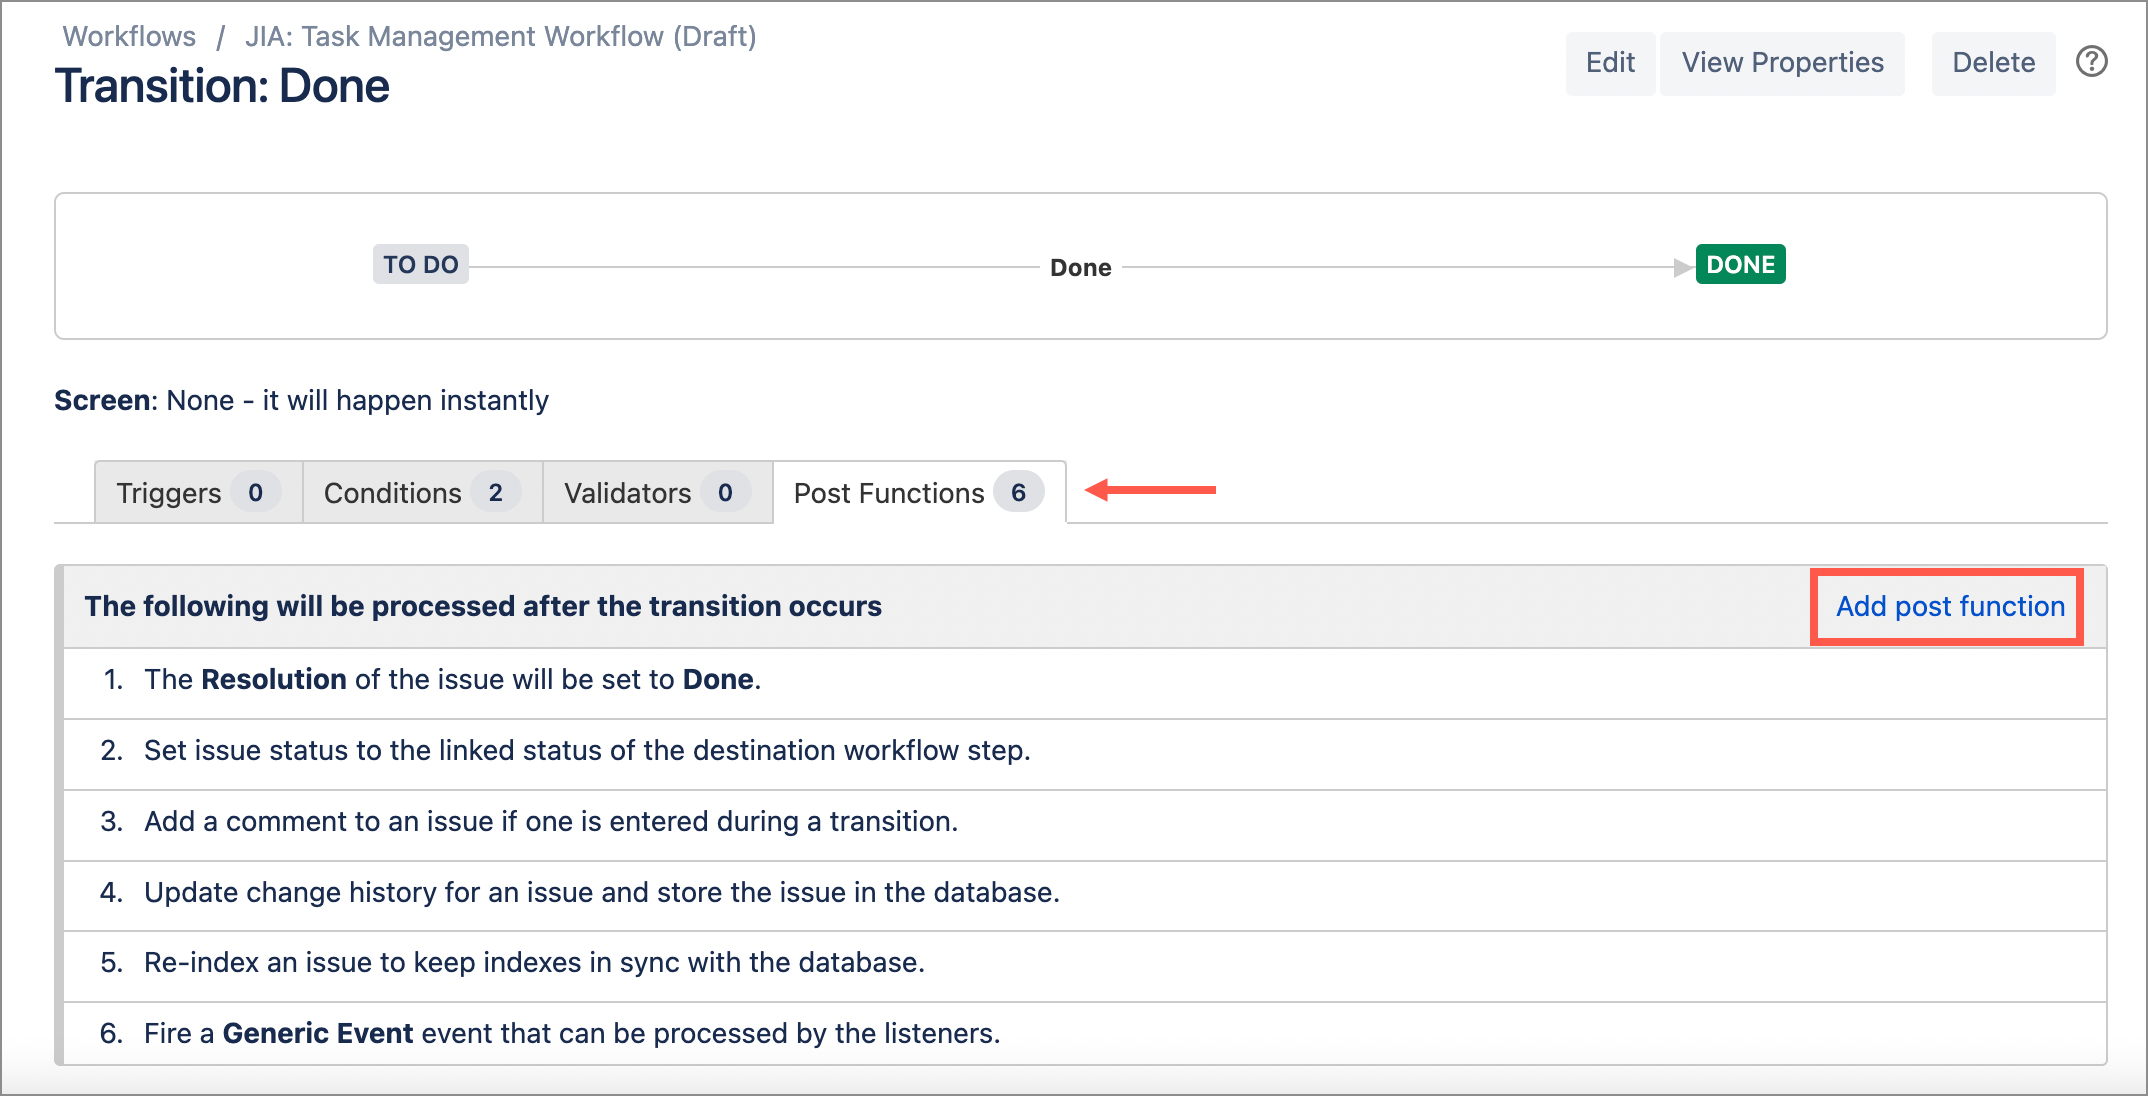 The transition page for the draft workflow with the post functions tab selected. The Add post function link is highlighted in red.